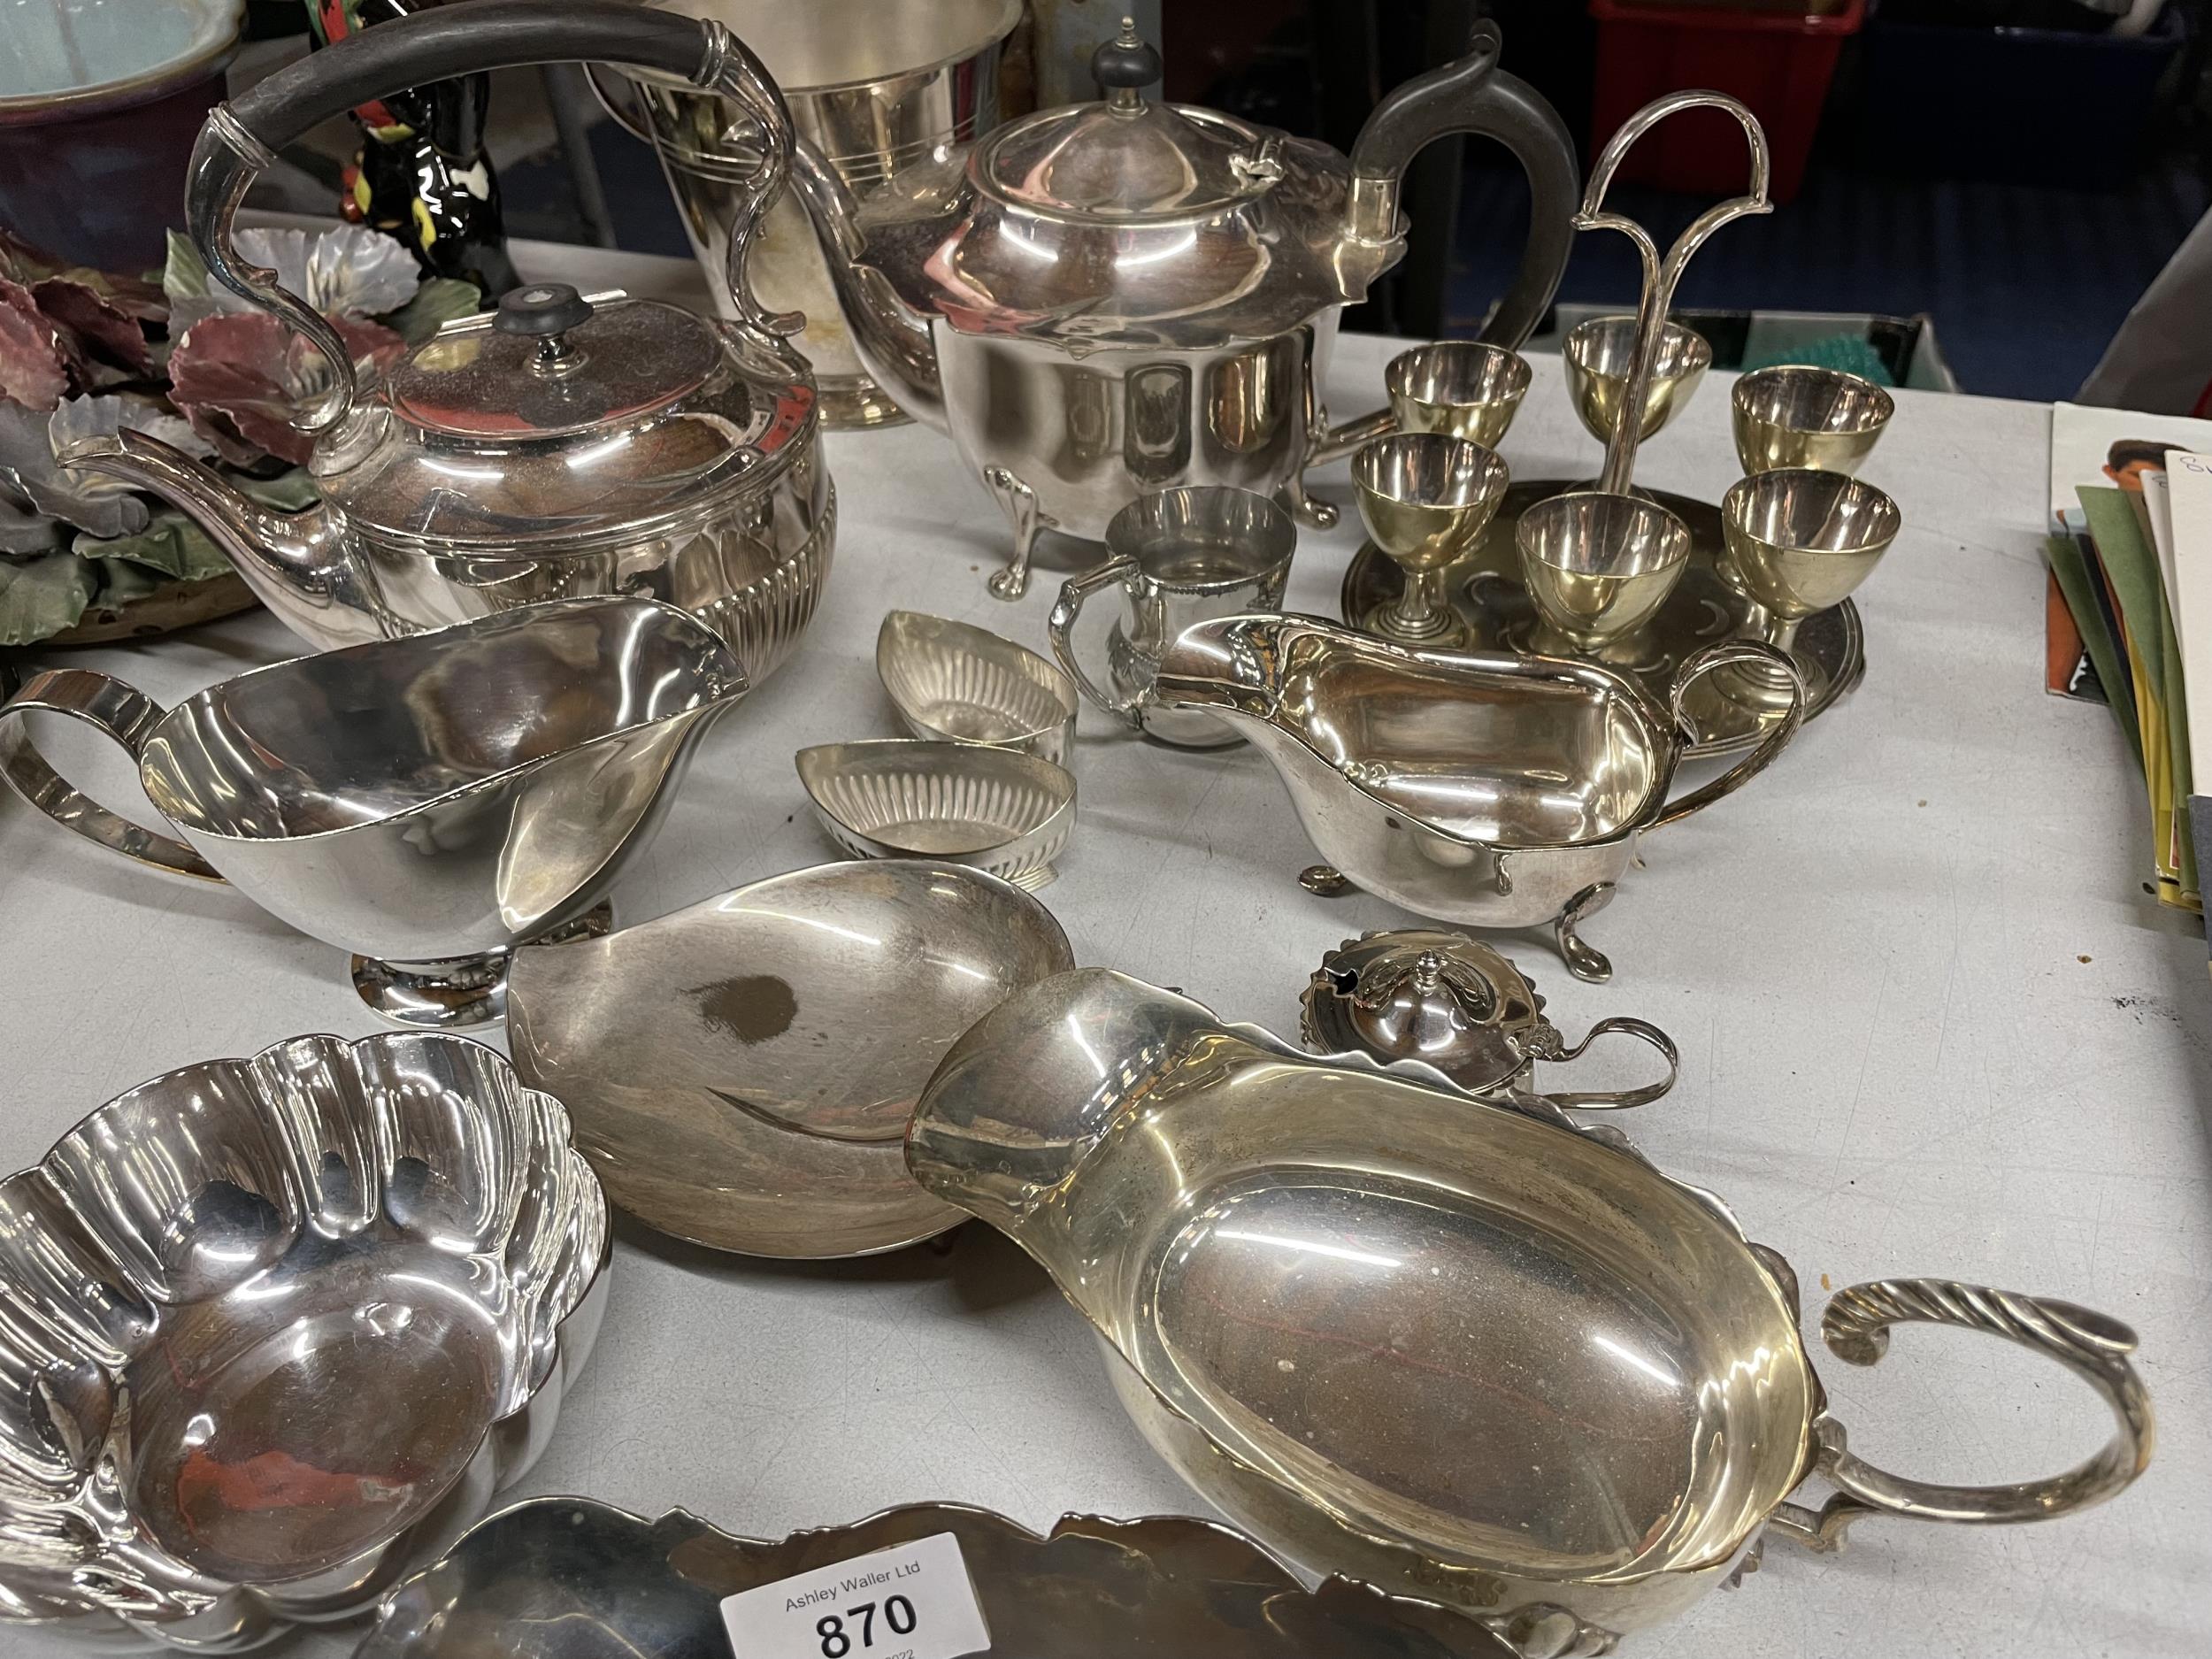 A COLLECTION OF SILVER PLATED ITEMS TO INCLUDE TEAPOTS, SAUCEBOATS, BOWLS, ICE BUCKET, ETC - Image 3 of 4